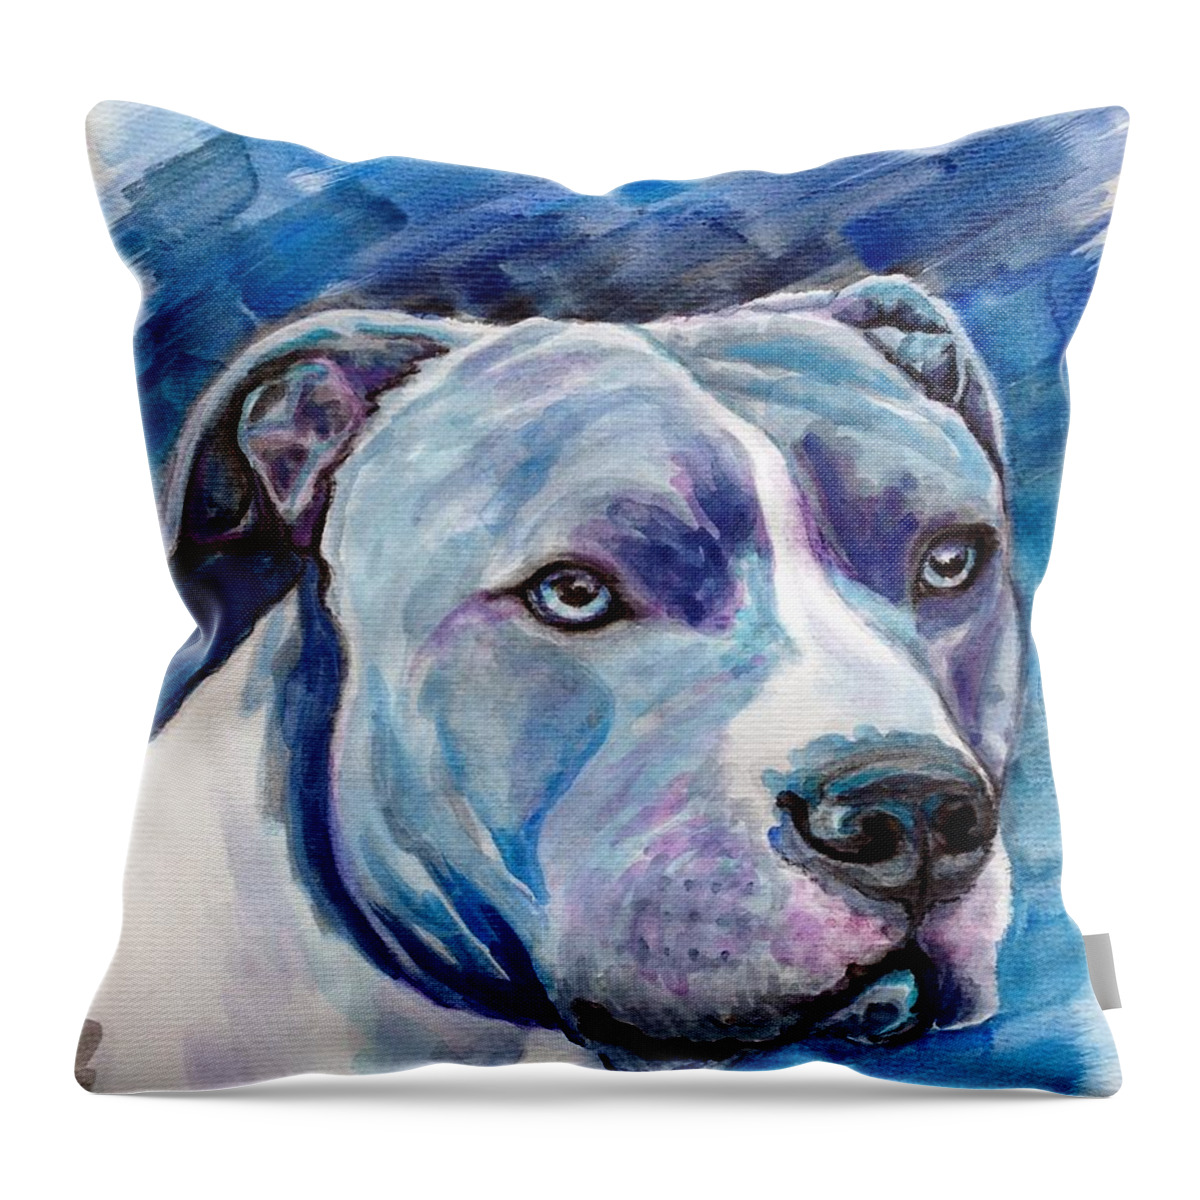 Dog Throw Pillow featuring the painting Ziggy by Ashley Kujan